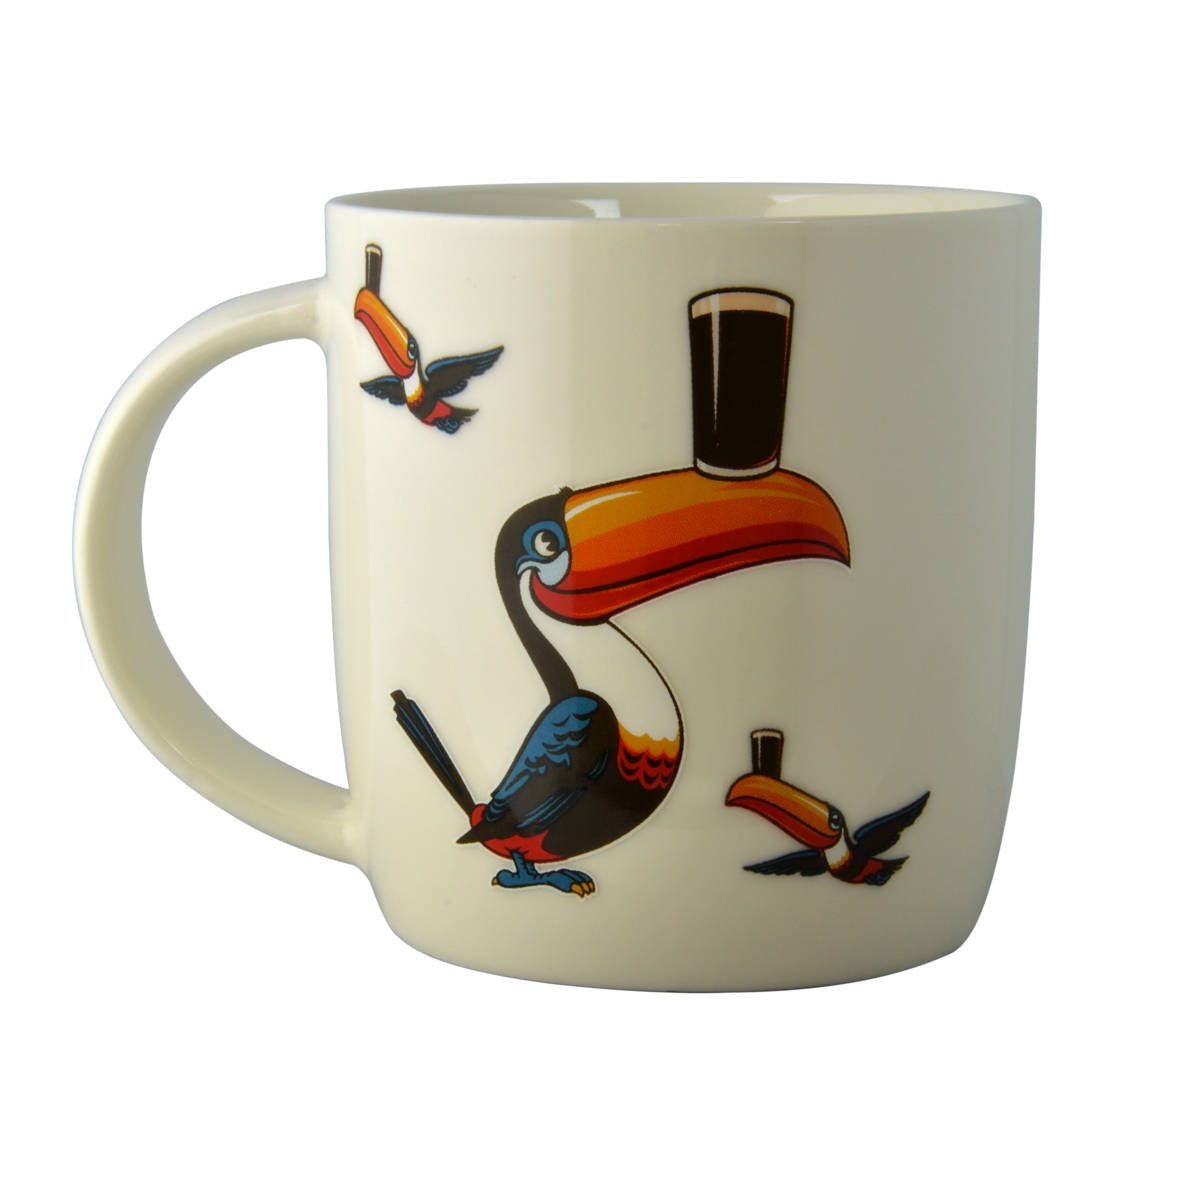 A Guinness White Mug with Standing and Flying Toucans mug.